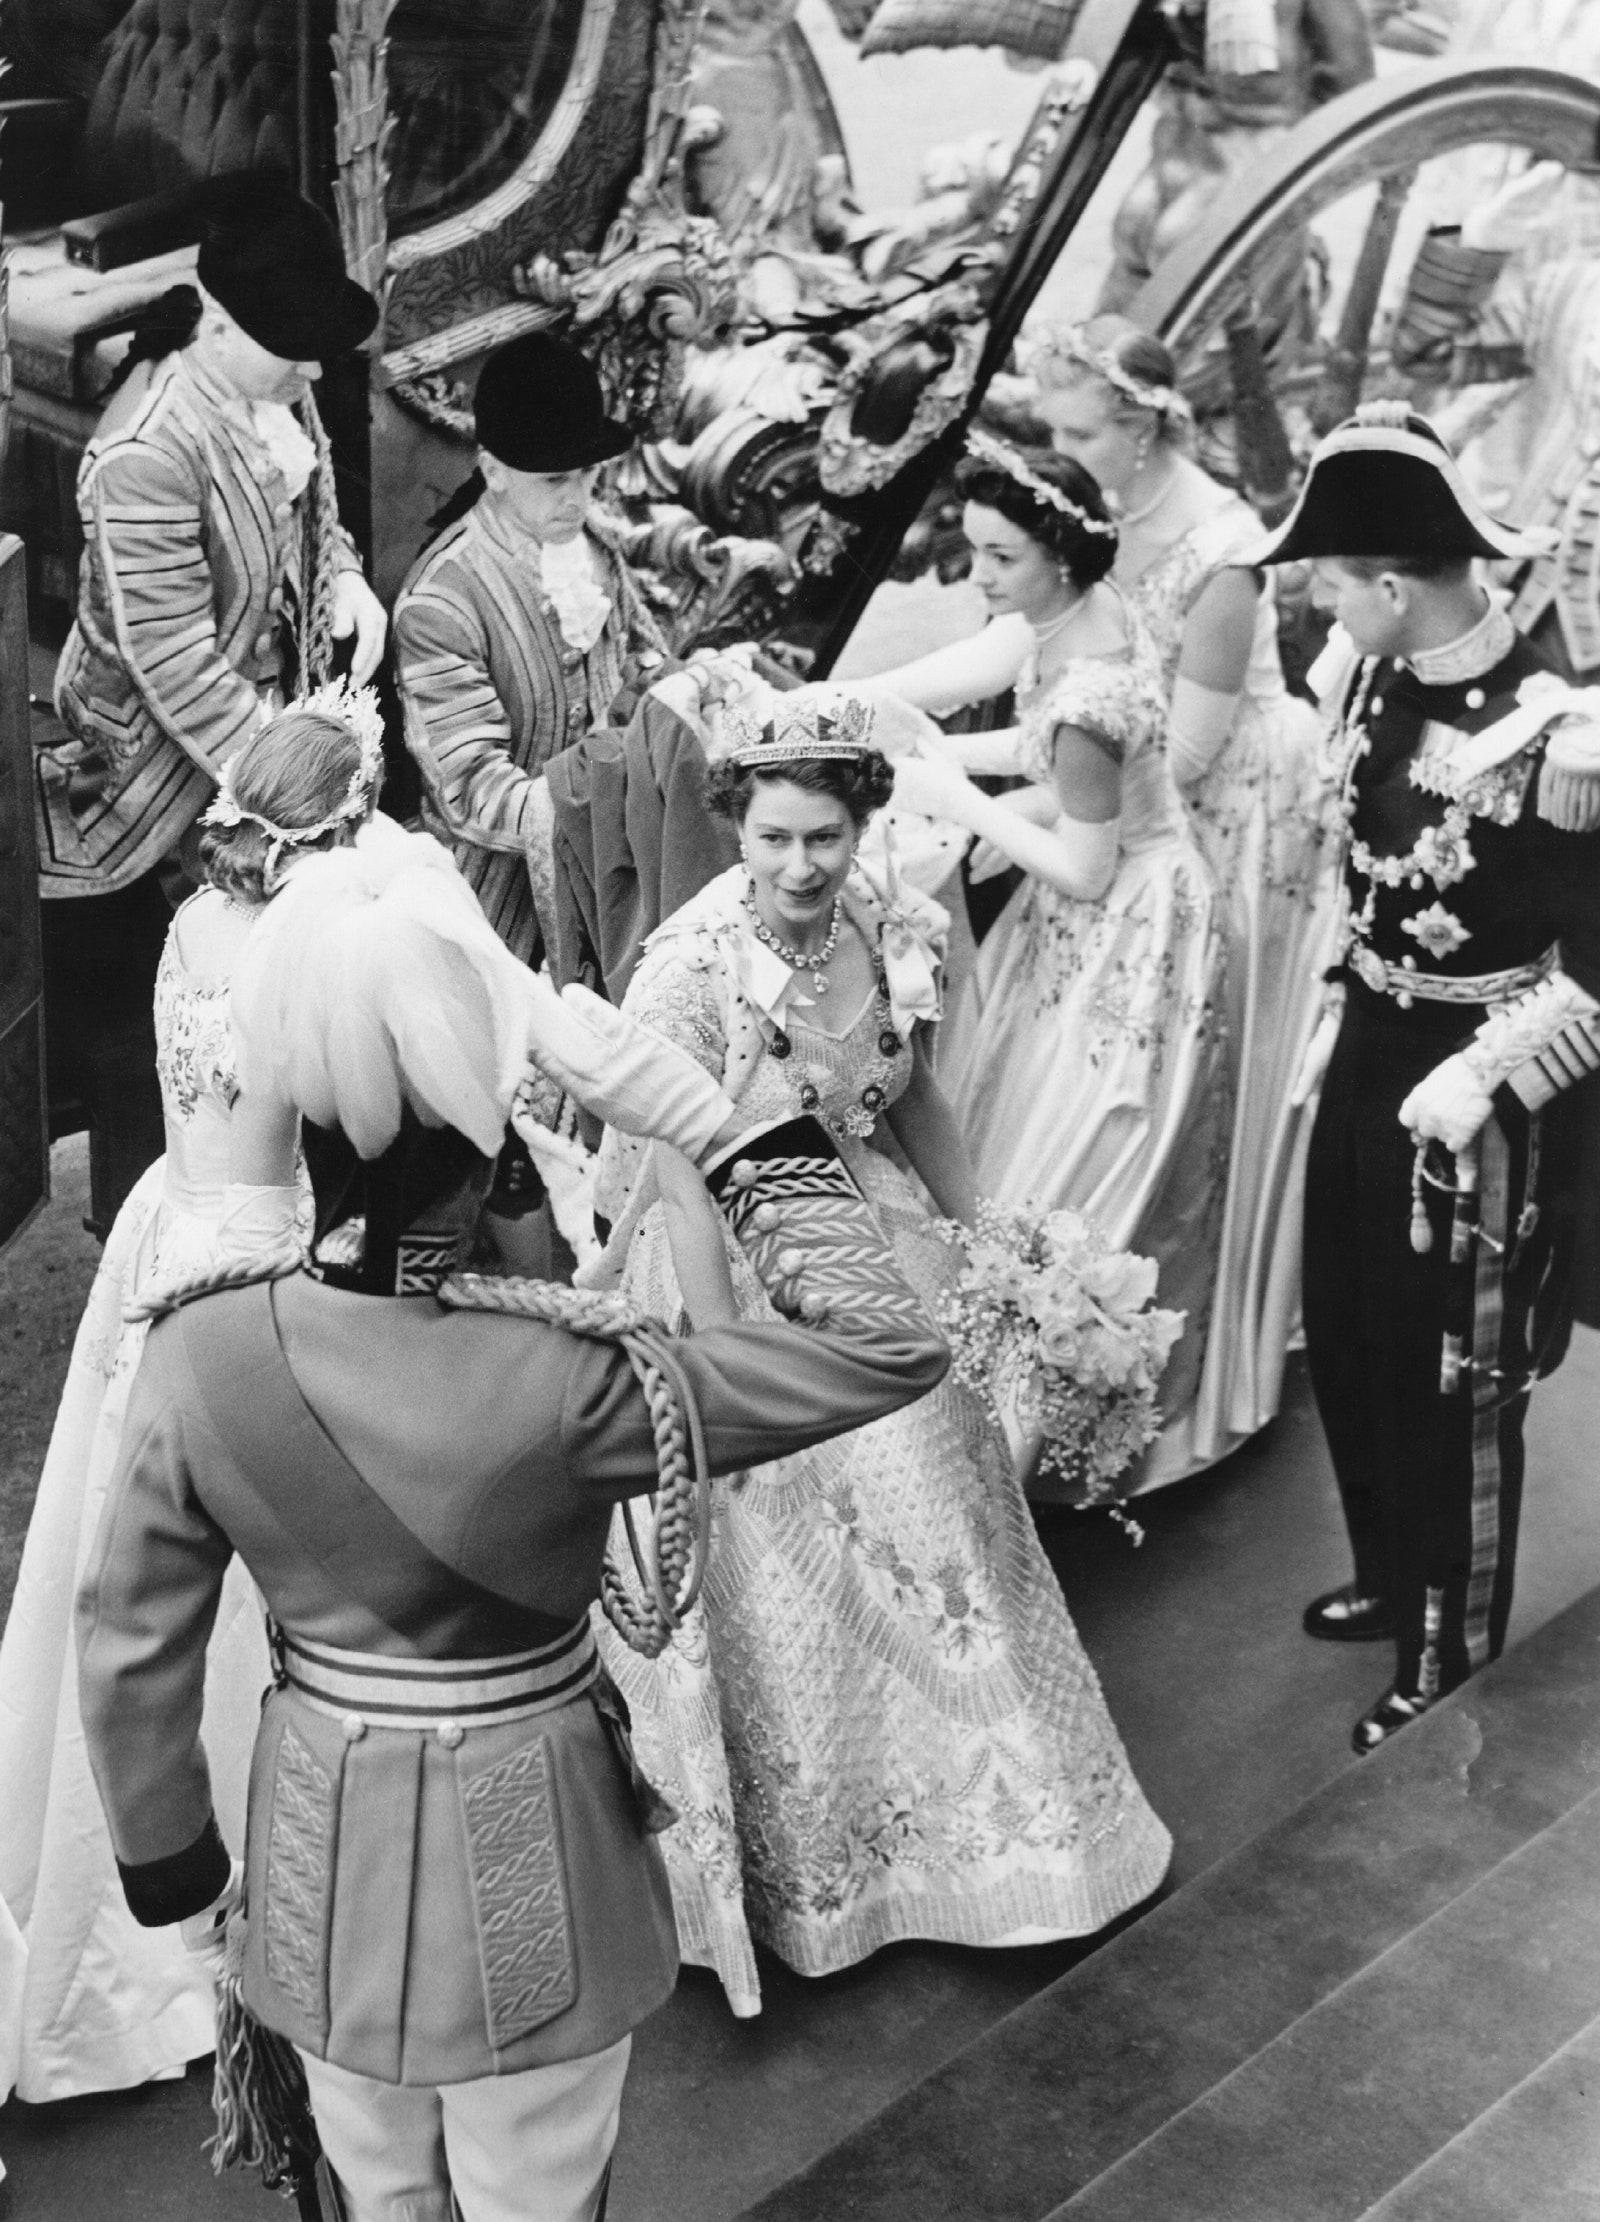 The Queen arriving at her Coronation with her attendants in Hartnell’s silk flower creations.